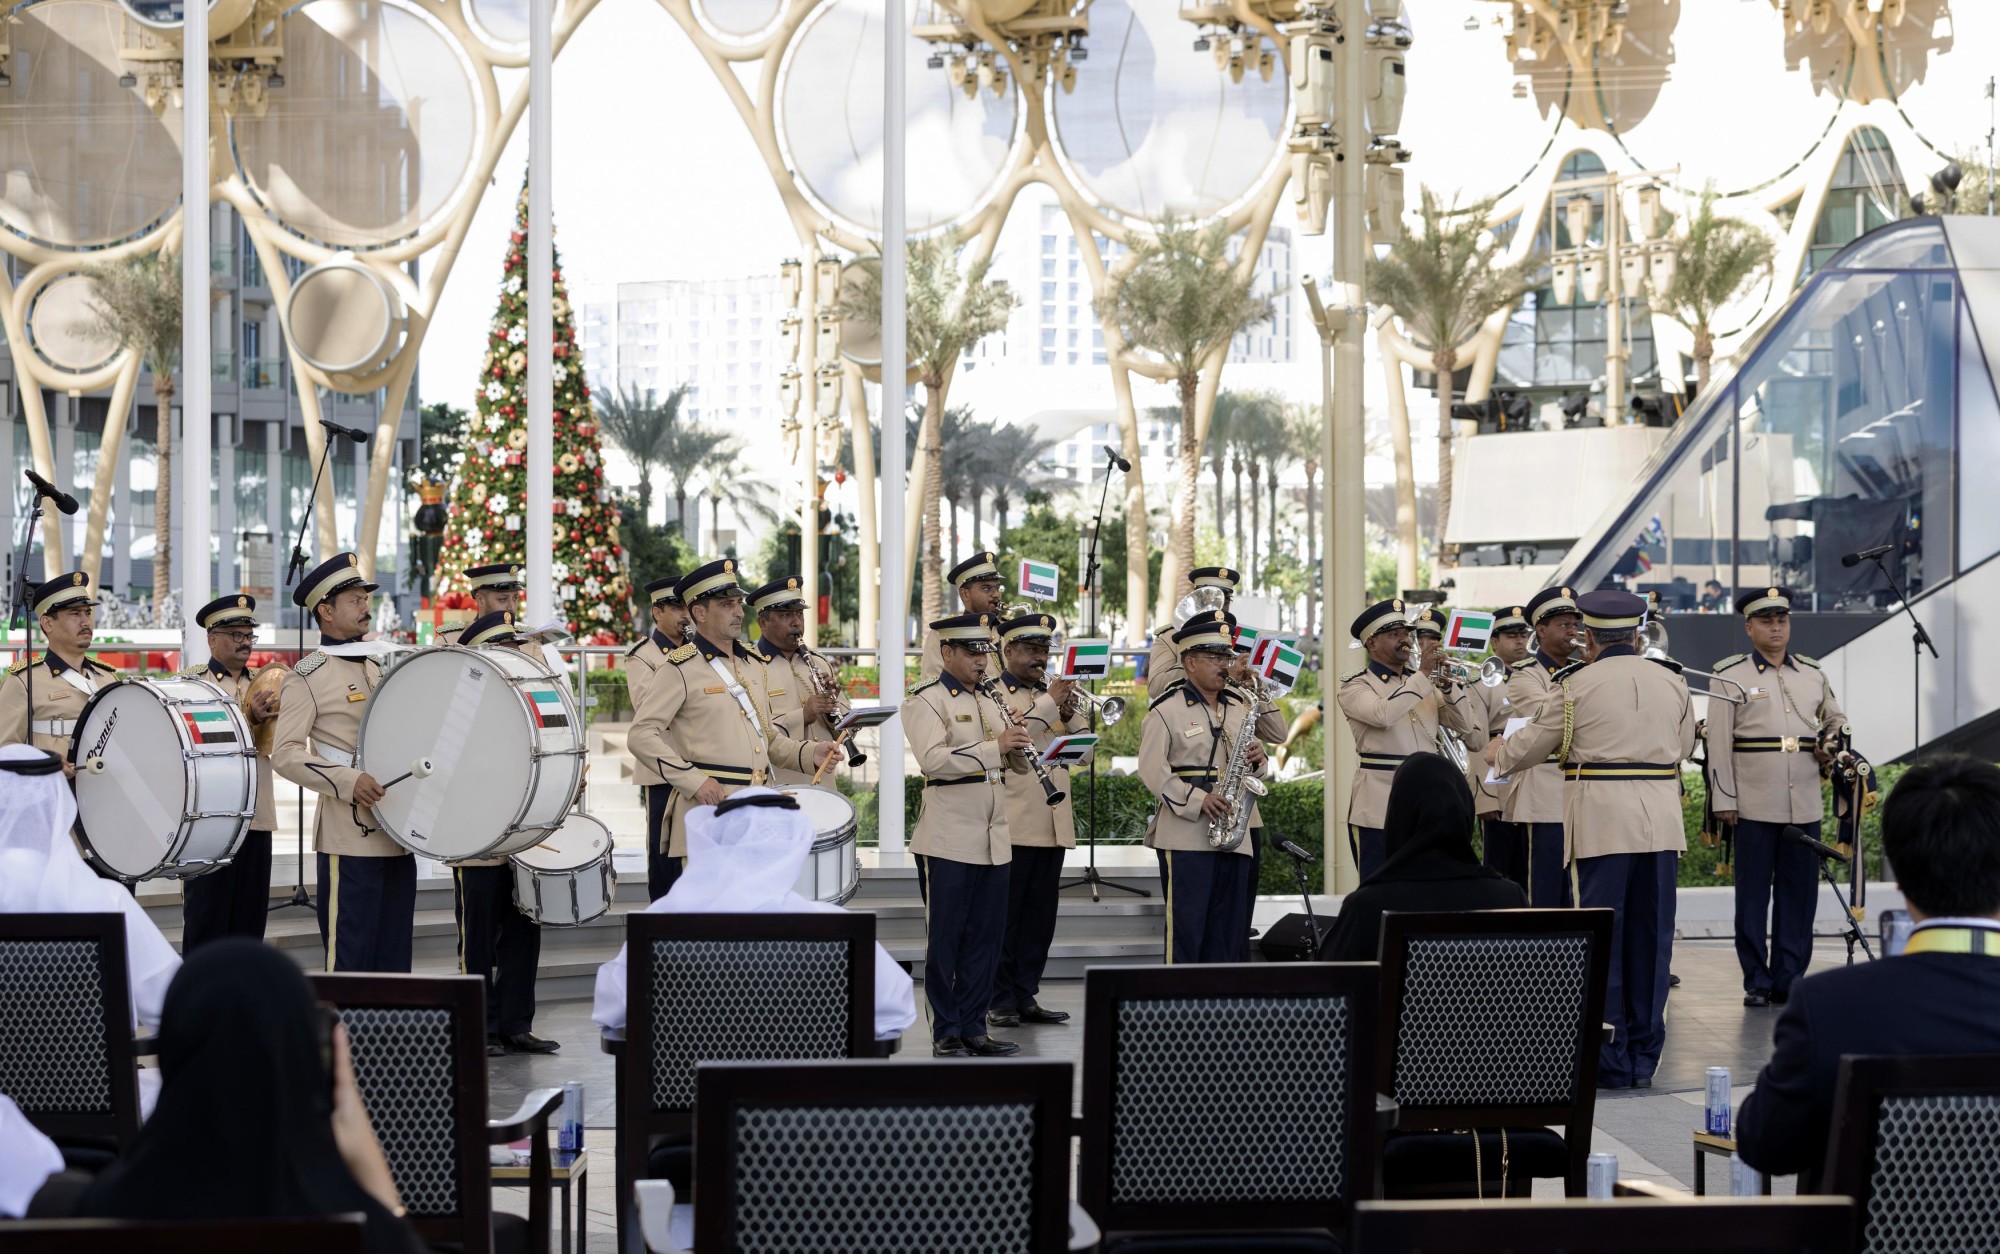 Marching Band performance during the League of Arab States Honour Day Ceremony in Al Wasl Plaza m25241